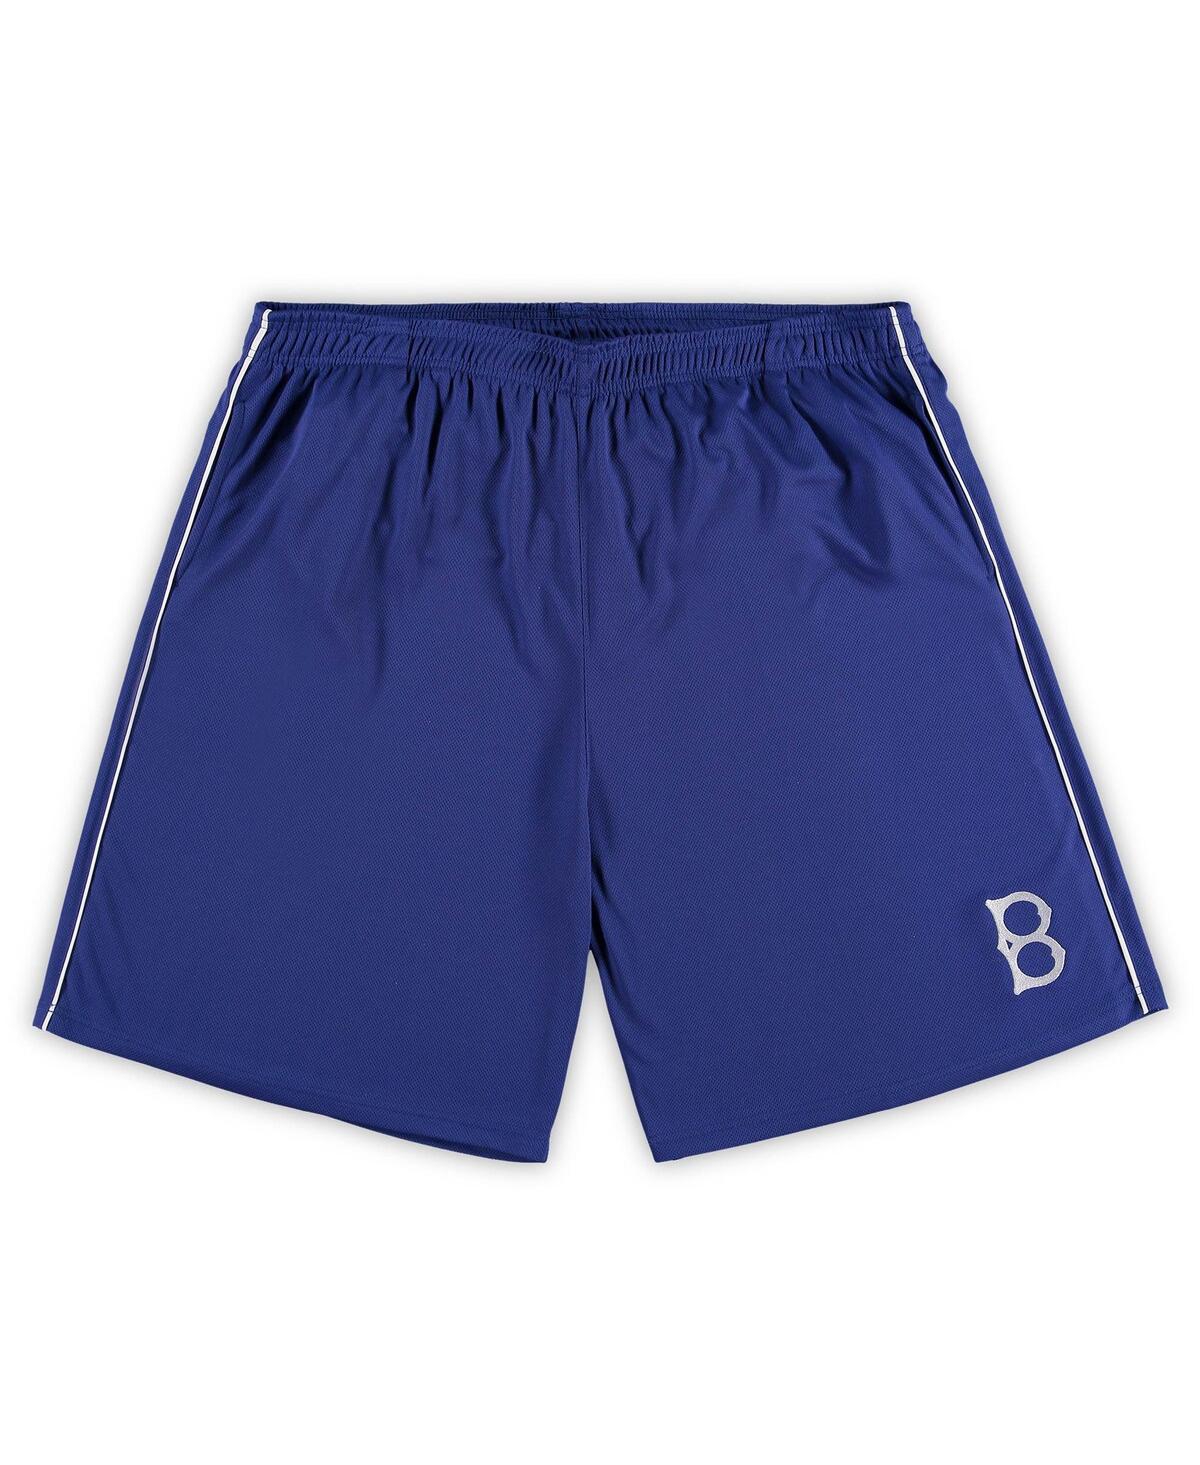 Shop Profile Men's Royal Brooklyn Dodgers Big And Tall Cooperstown Collection Mesh Shorts